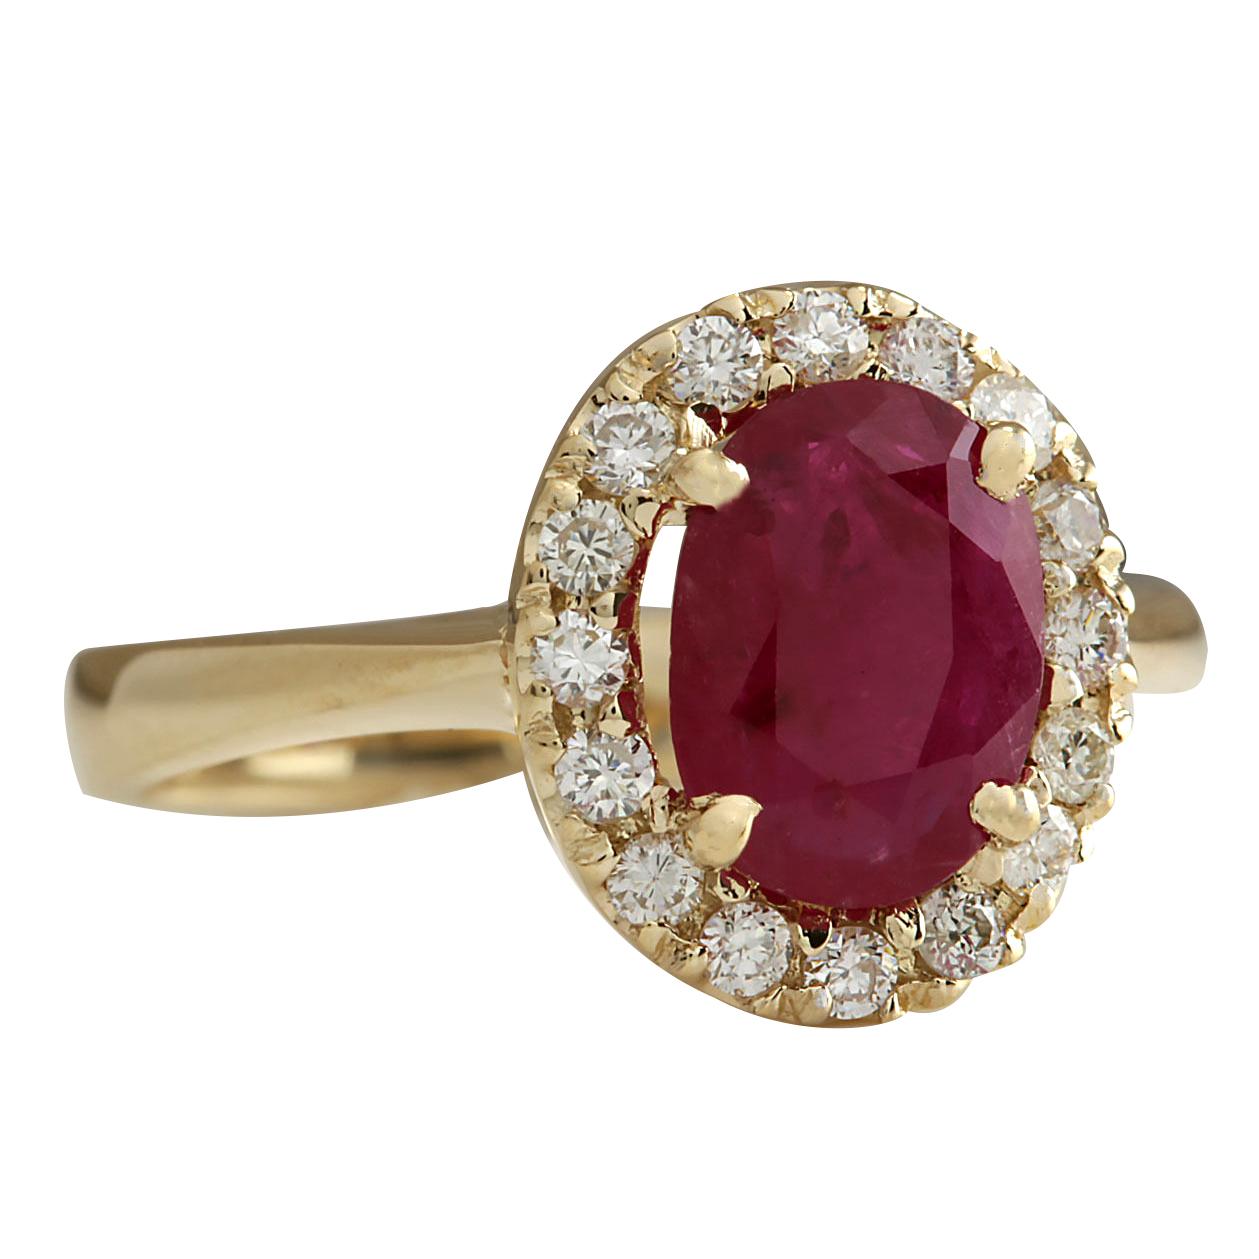 Stamped: 14K Yellow Gold
Total Ring Weight: 4.0 Grams
Total Natural Ruby Weight is 1.46 Carat (Measures: 9.00x7.00 mm)
Color: Red
Total Natural Diamond Weight is 0.35 Carat
Color: F-G, Clarity: VS2-SI1
Face Measures: 12.60x10.85 mm
Sku: [703159W]